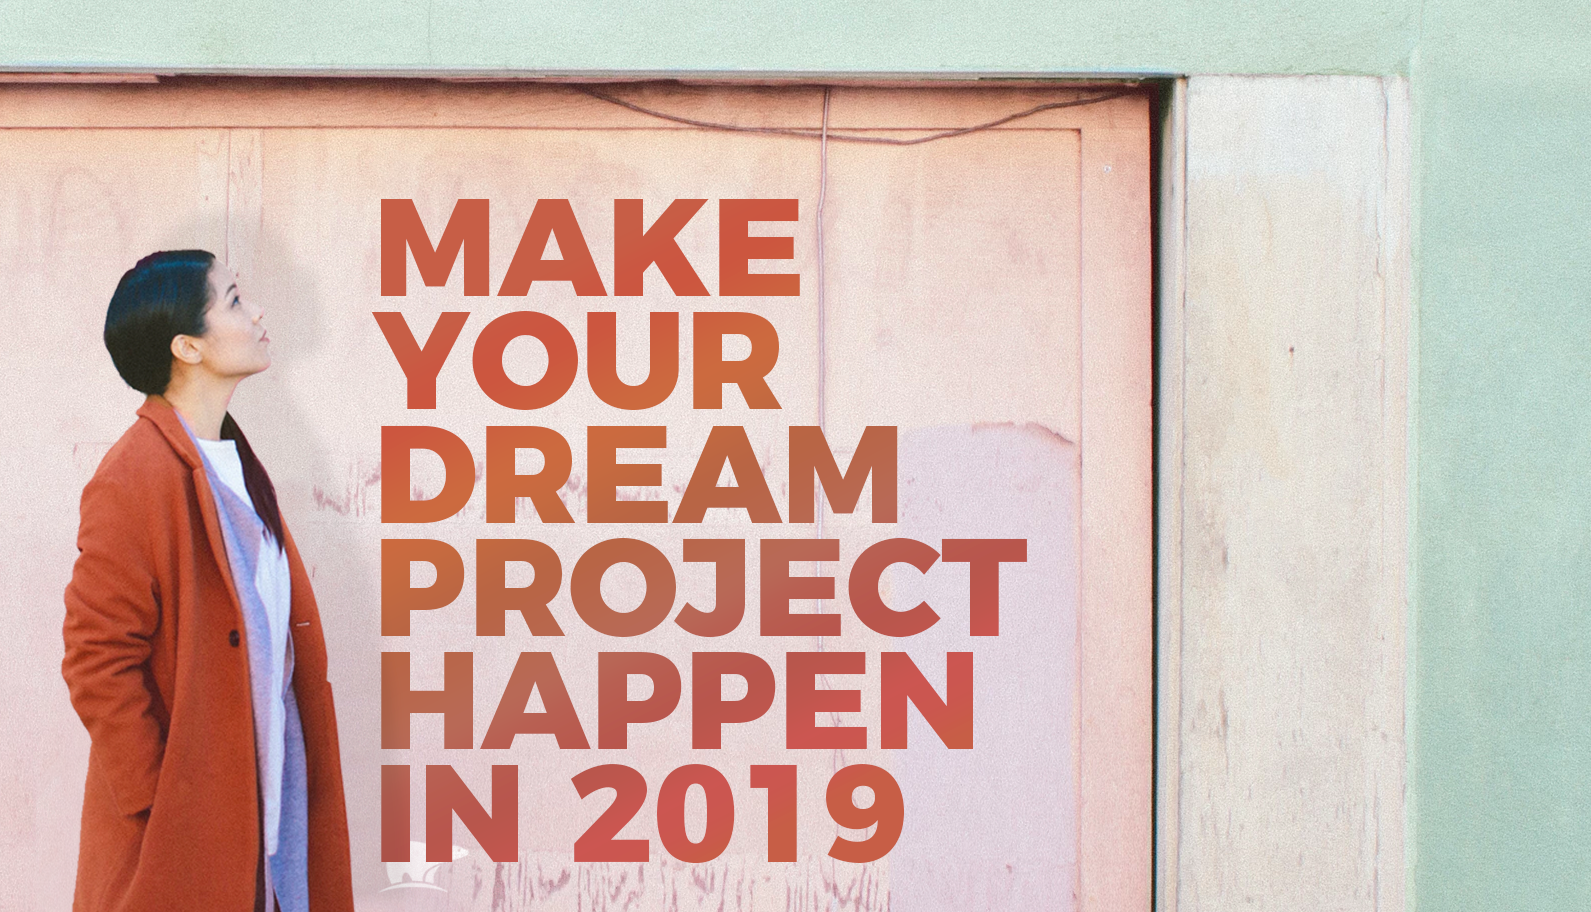 How to make your dream idea happen in 2019